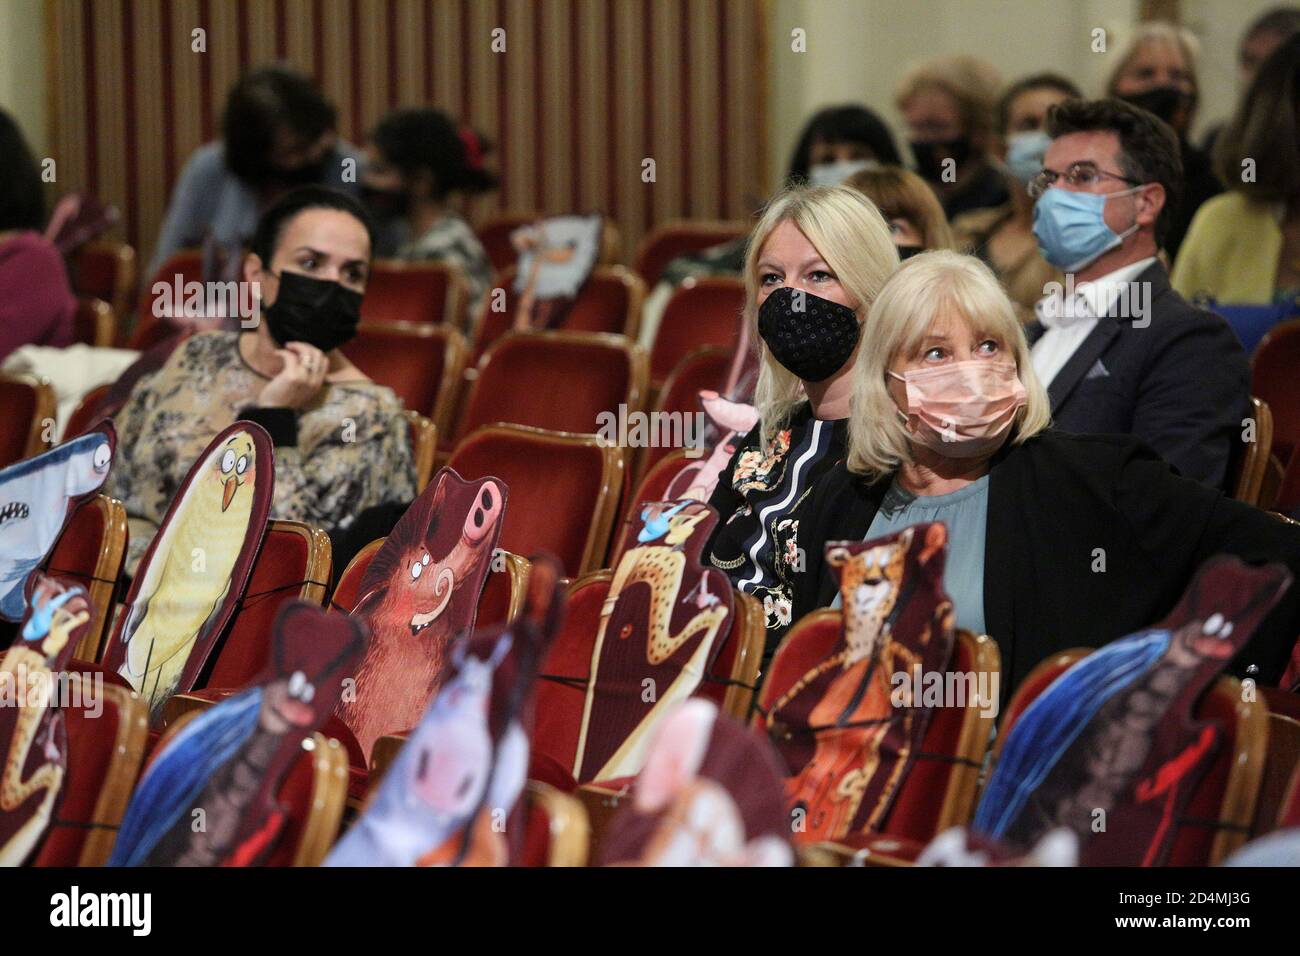 Zagreb, Croatia. 9th Oct, 2020. October 09, 2020, Zagreb, Croatia - World premiere of writer Dan Brown's musical picture book Wild Symphony. The concert was held with the participation of the Zagreb Philharmonic Orchestra. Credit: Anto Magzan/ZUMA Wire/Alamy Live News Stock Photo